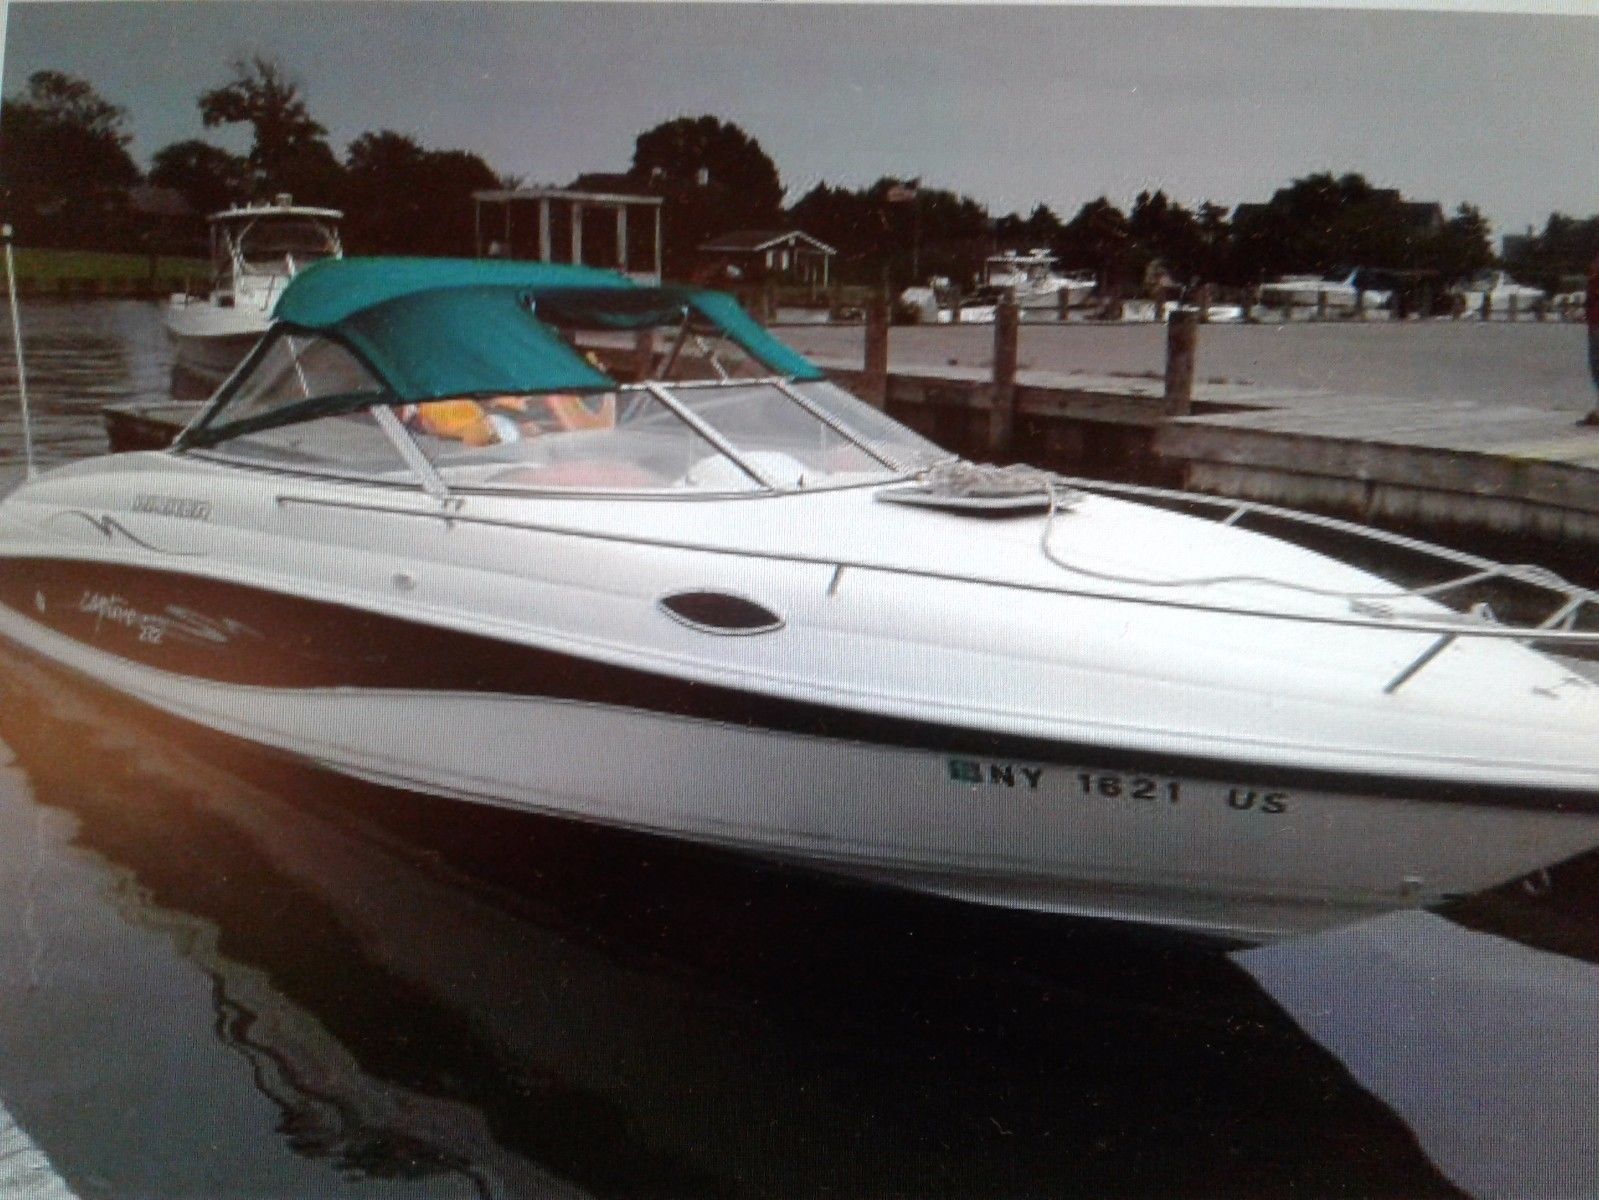 Rinker 1998 for sale for $9,950 - Boats-from-USA.com